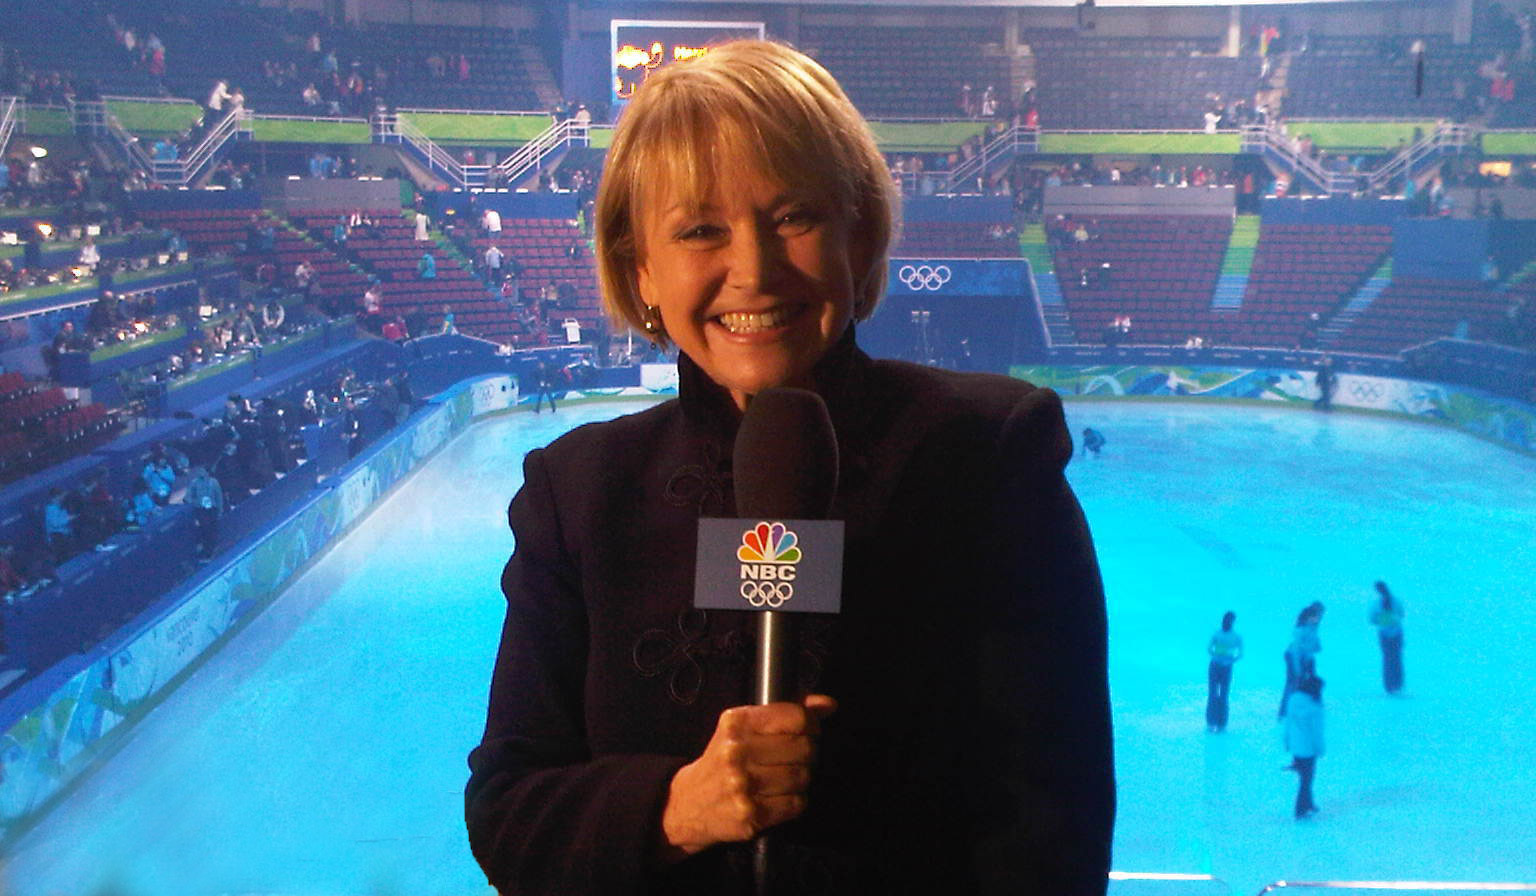 Joyce, in a black jacket, holds a NBC Olympics microphone and poses in front of an ice skating rink from above.